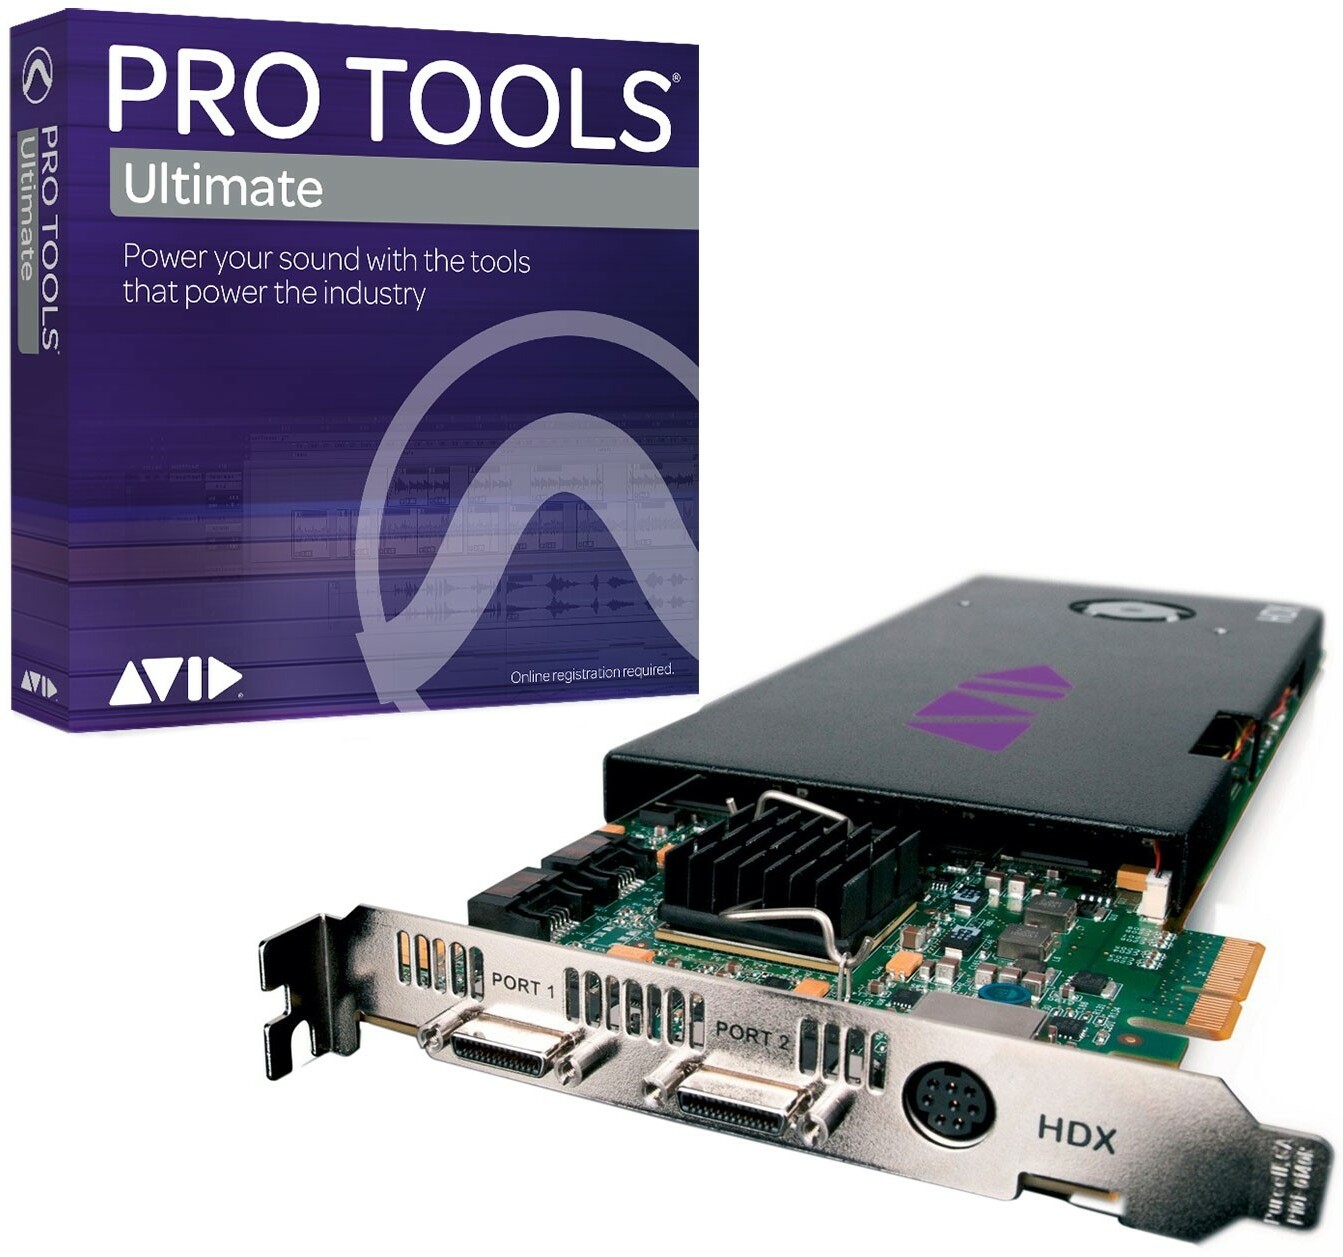 Avid Avid Hdx Core With Pro Tools Ultimate - HD protools system - Main picture